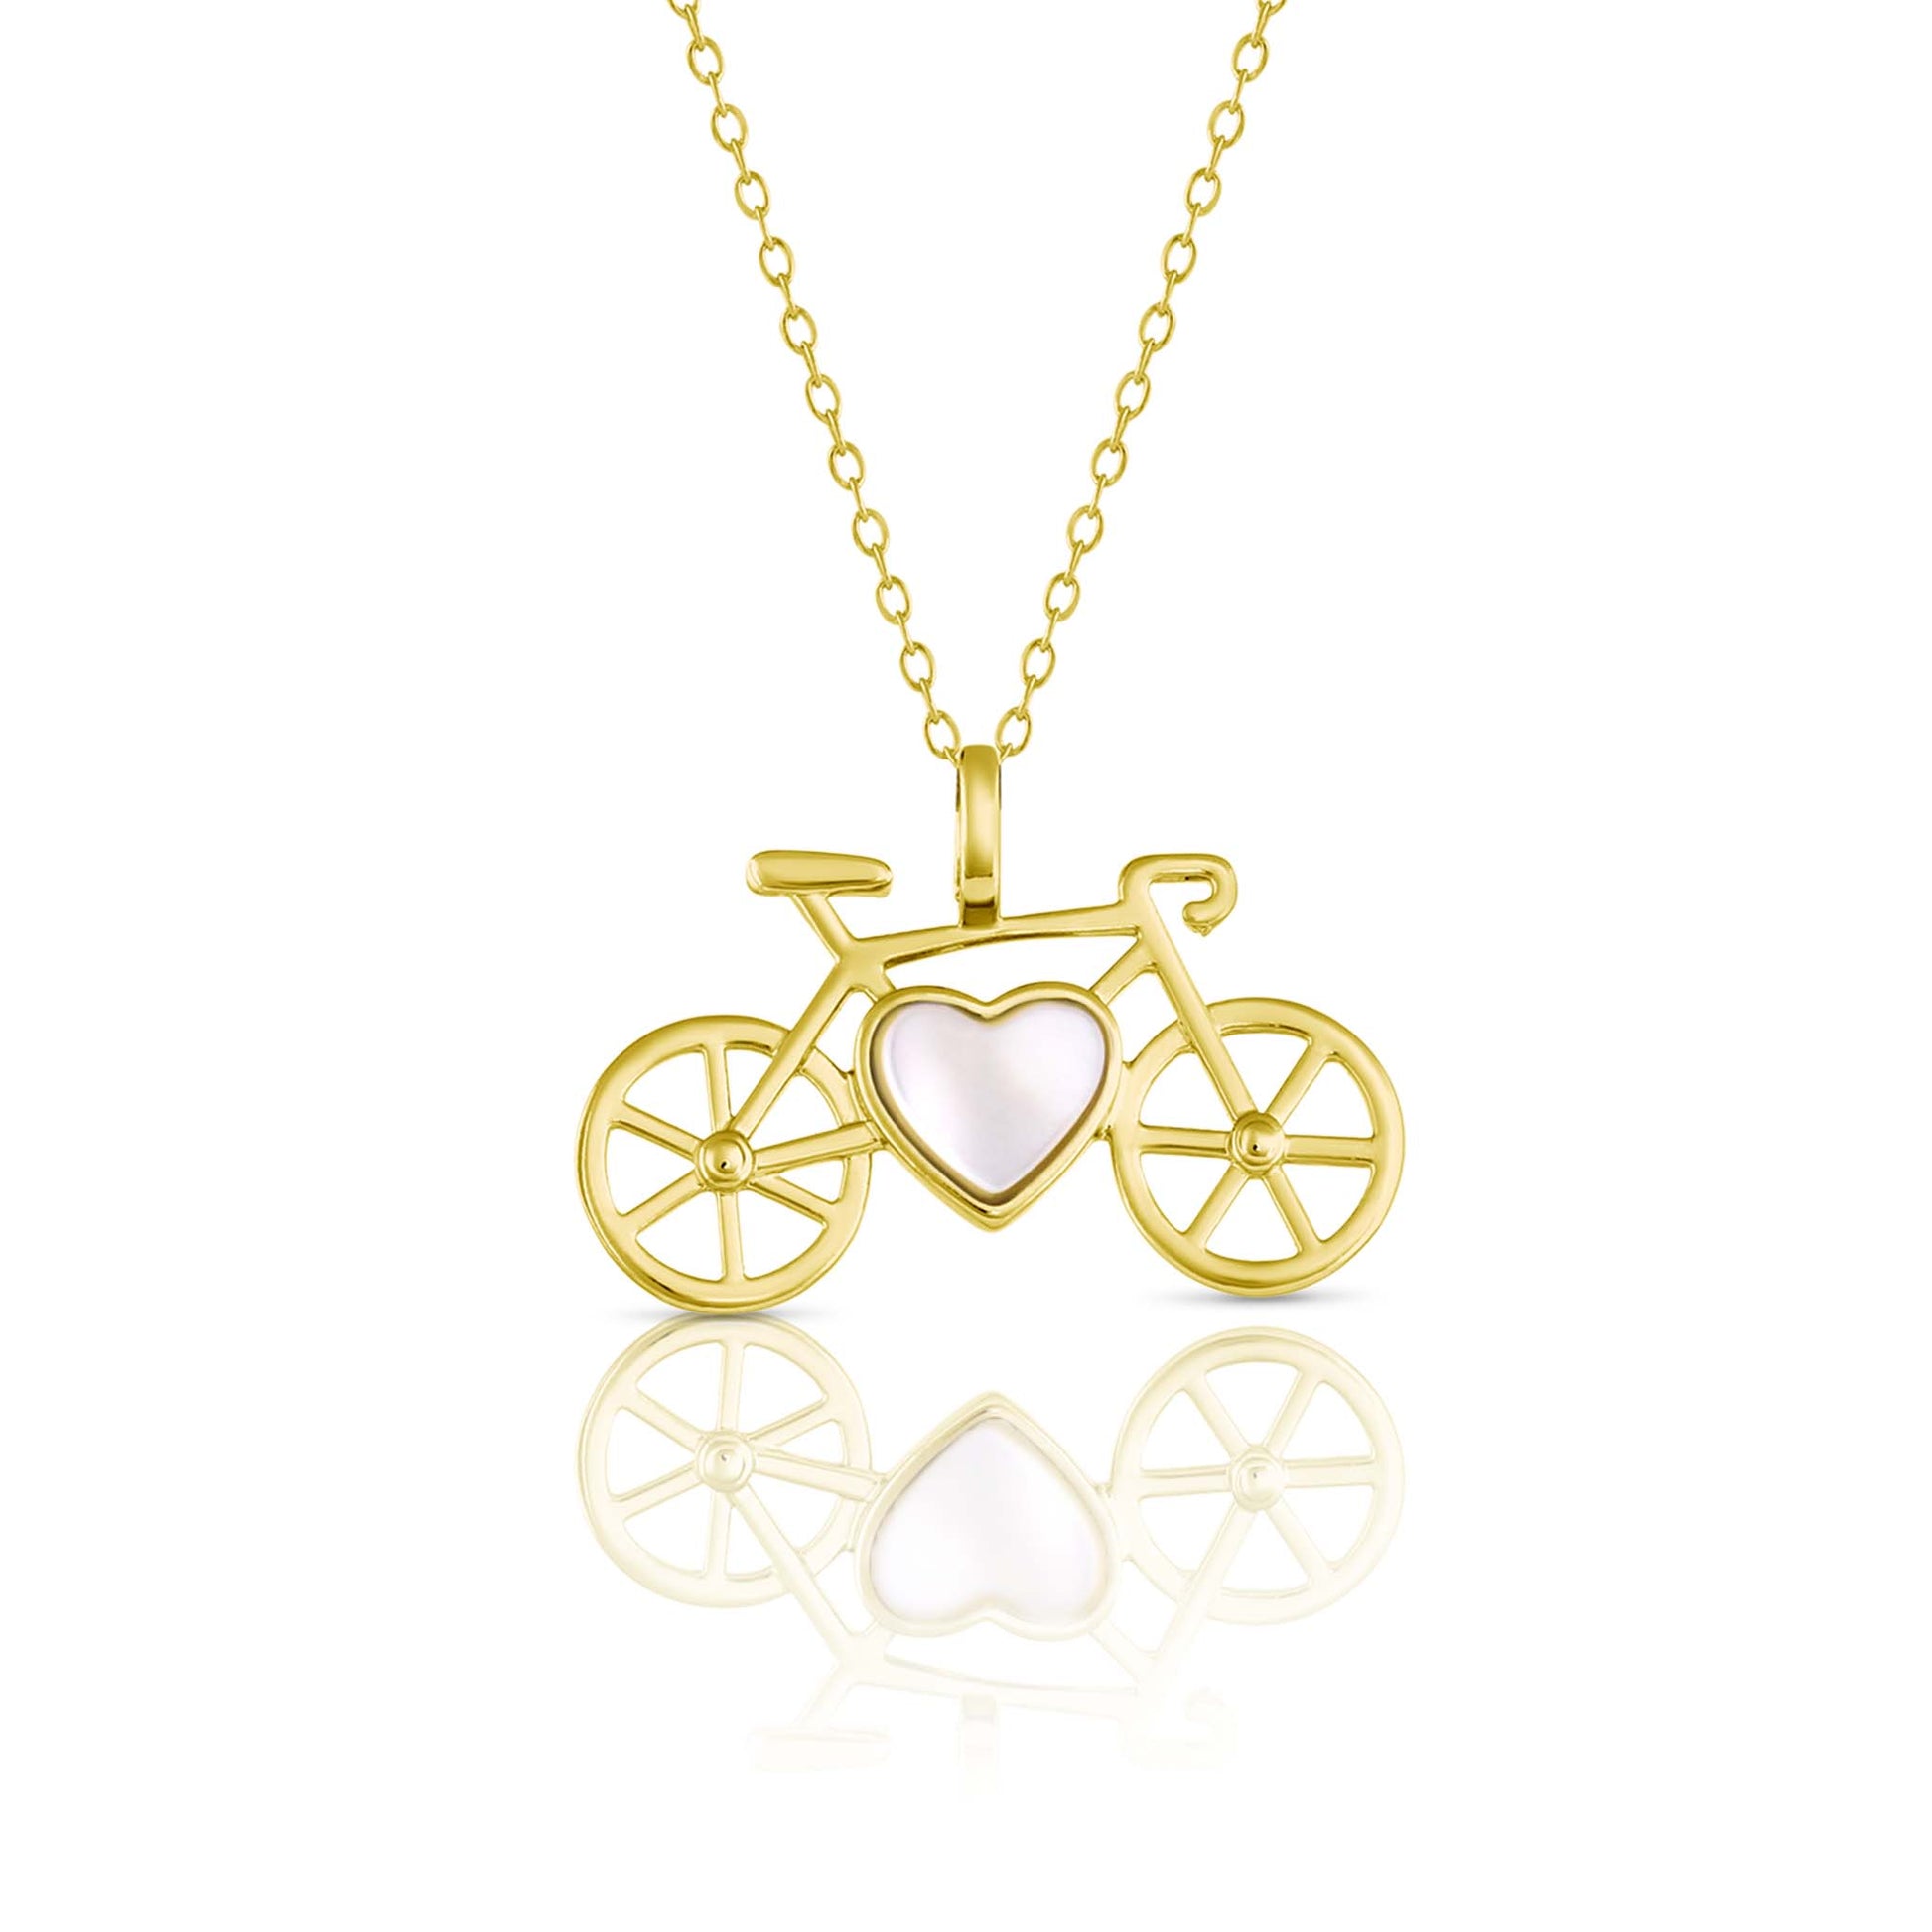 Bike Pendant Necklace in Silver Plated with a heart shaped Mother-of-Pearl Gemstone made by Born to Rock Jewelry | Great gift for bikers